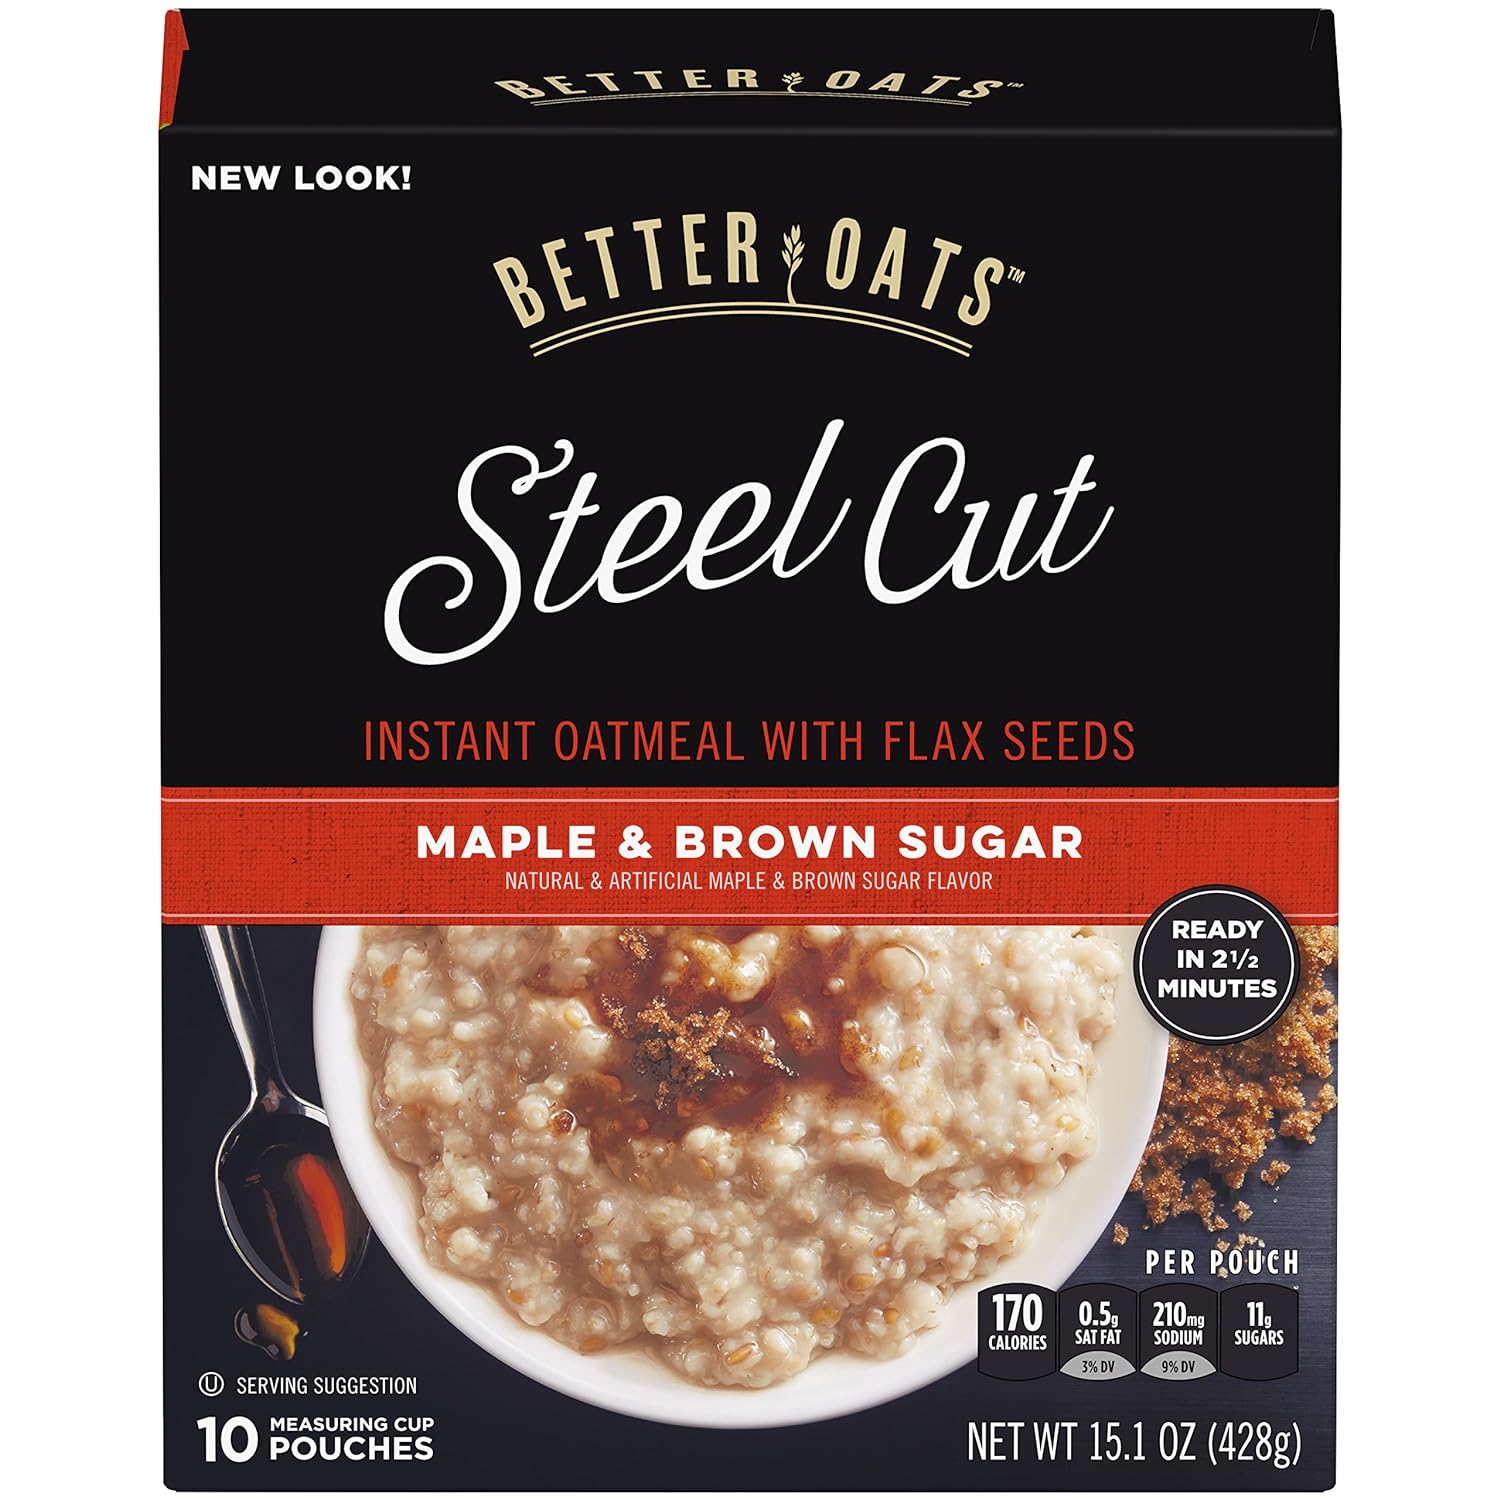 Better Oats Maple and Brown Sugar Steel Cut Oatmeal Packets, Instant Oatmeal Packets with Steel Cut Oats and Flax Seeds, Ready in 2.5 Minutes, Maple Brown Sugar Flavor, Pack of 6, 15.1 OZ Pack